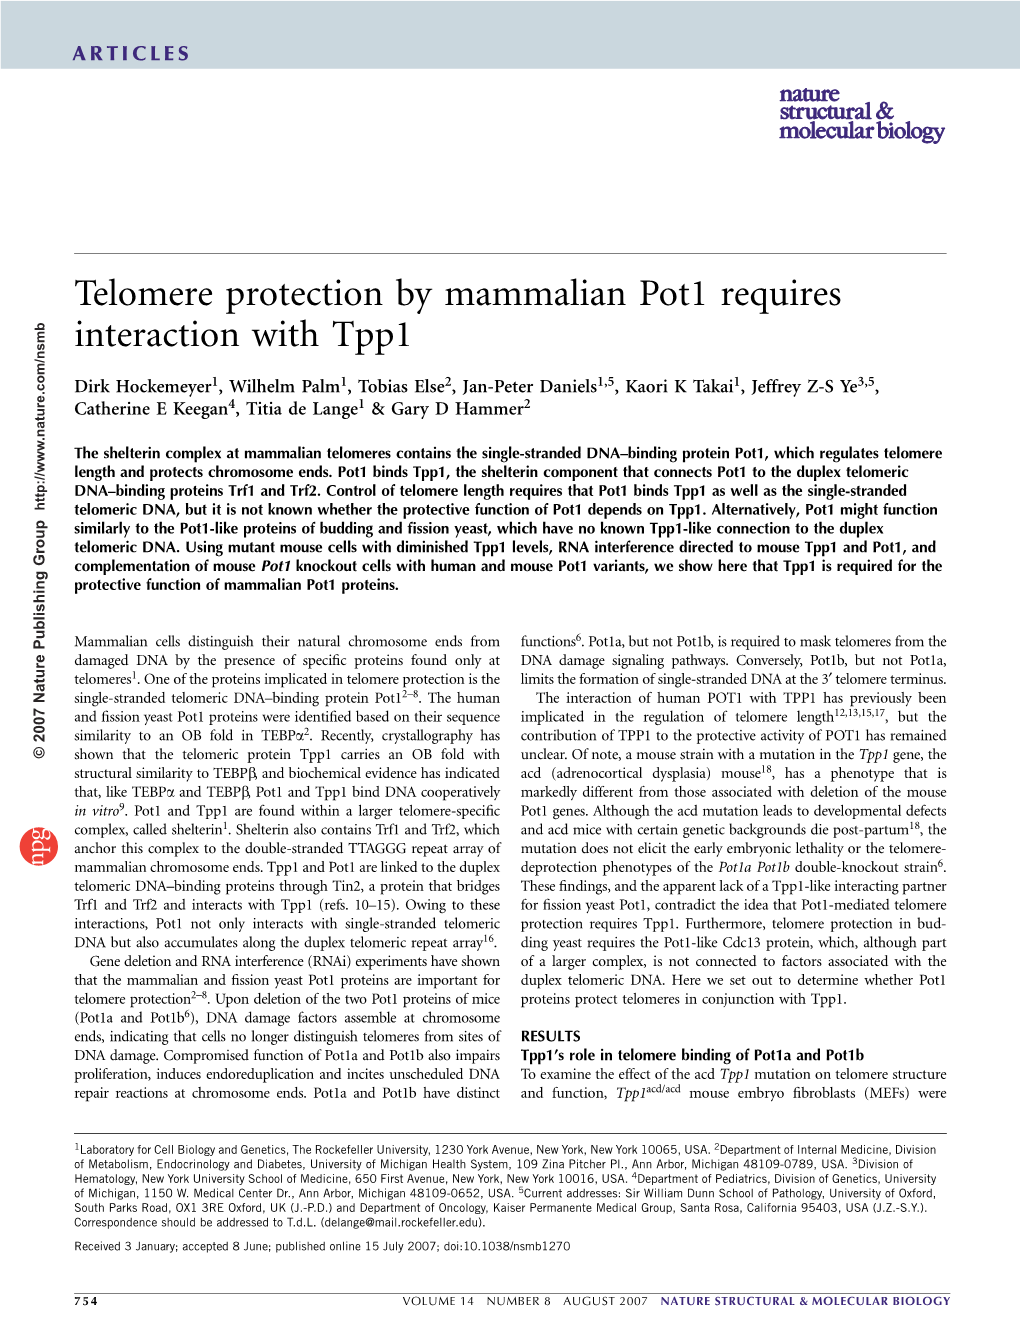 Telomere Protection by Mammalian Pot1 Requires Interaction with Tpp1